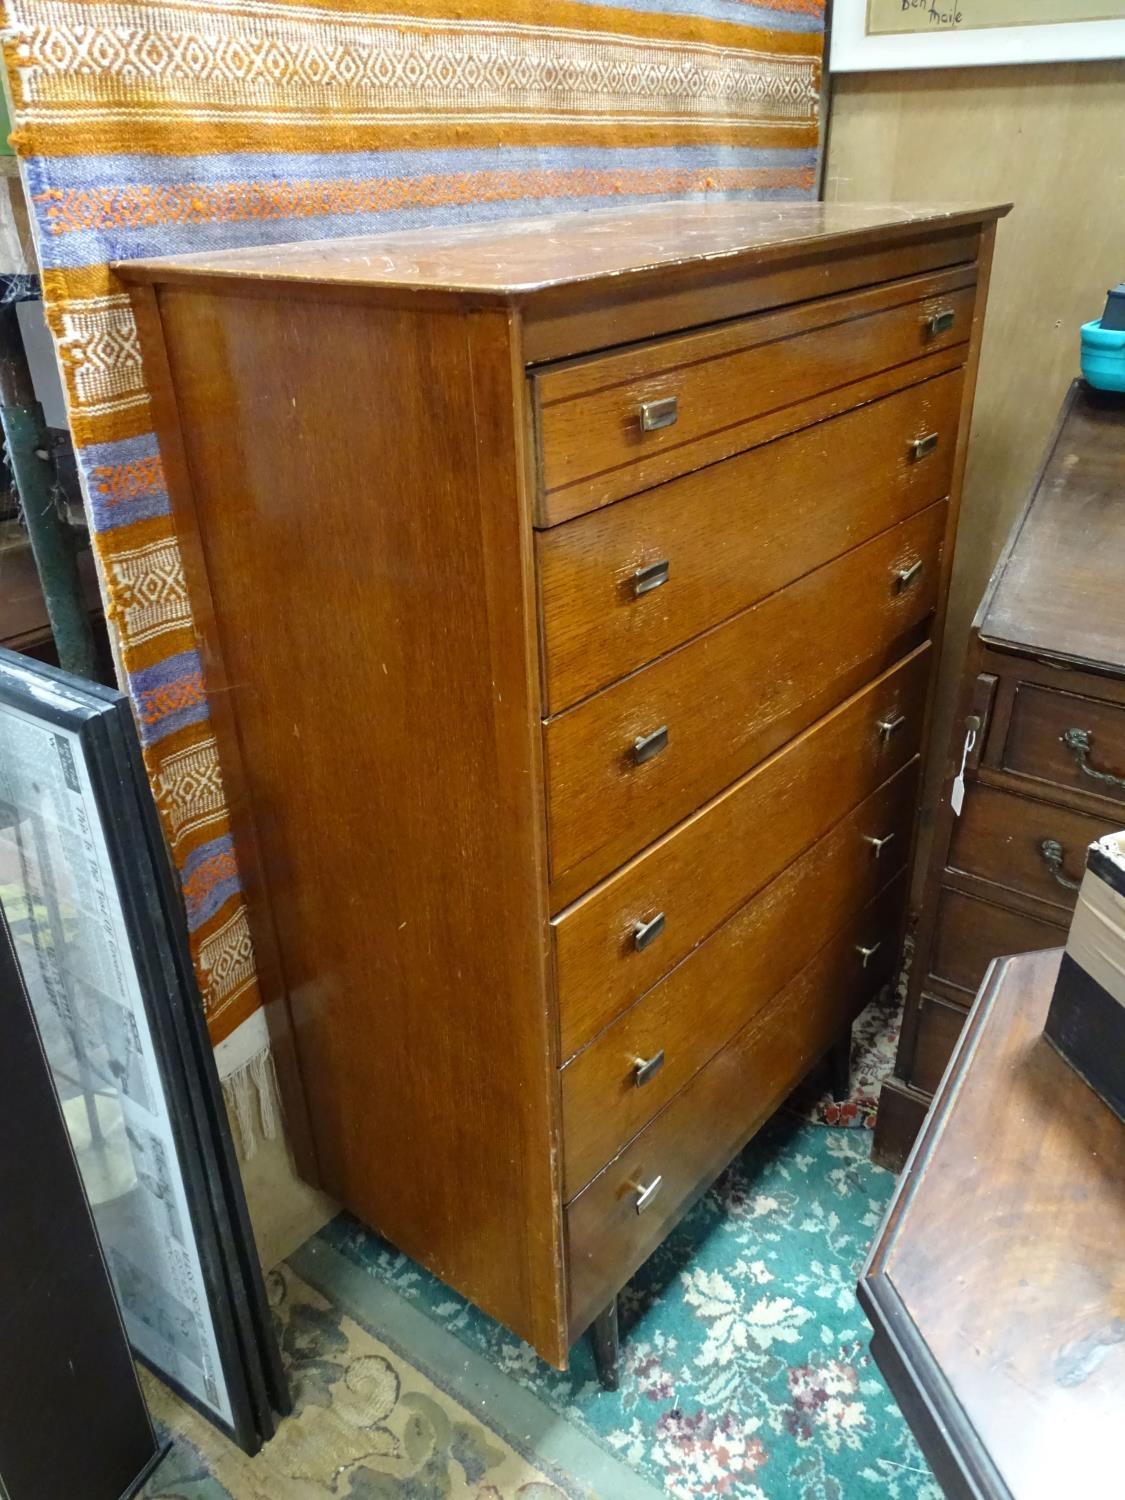 Lebus Vintage retro tallboy / chest of drawers Please Note - we do not make reference to the